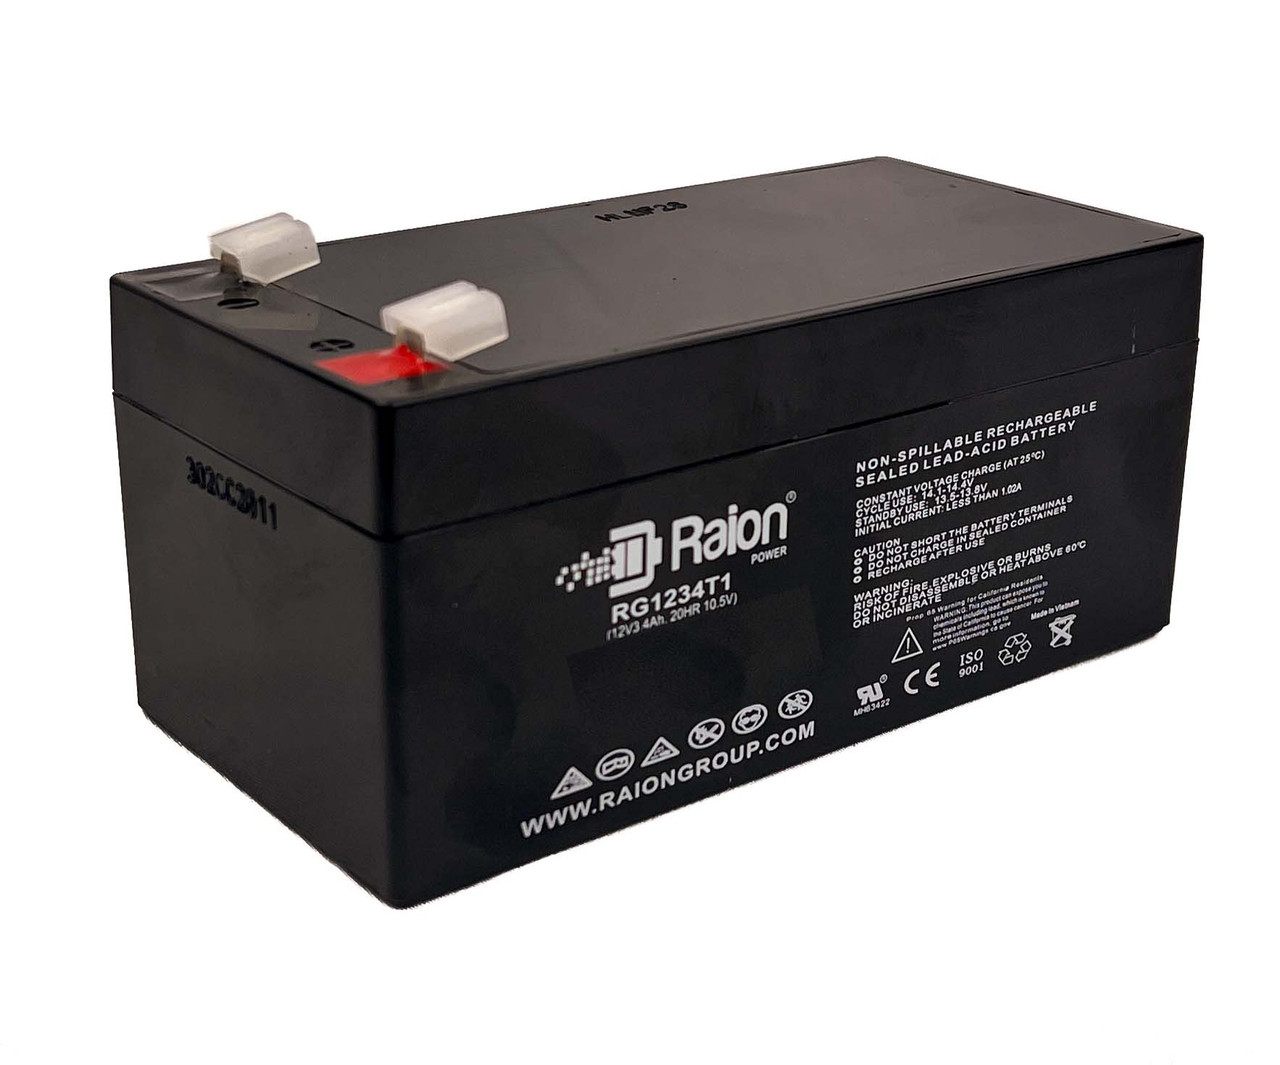 Raion Power 12V 3.4Ah Non-Spillable Replacement Battery for Gruber Power GPS12-35